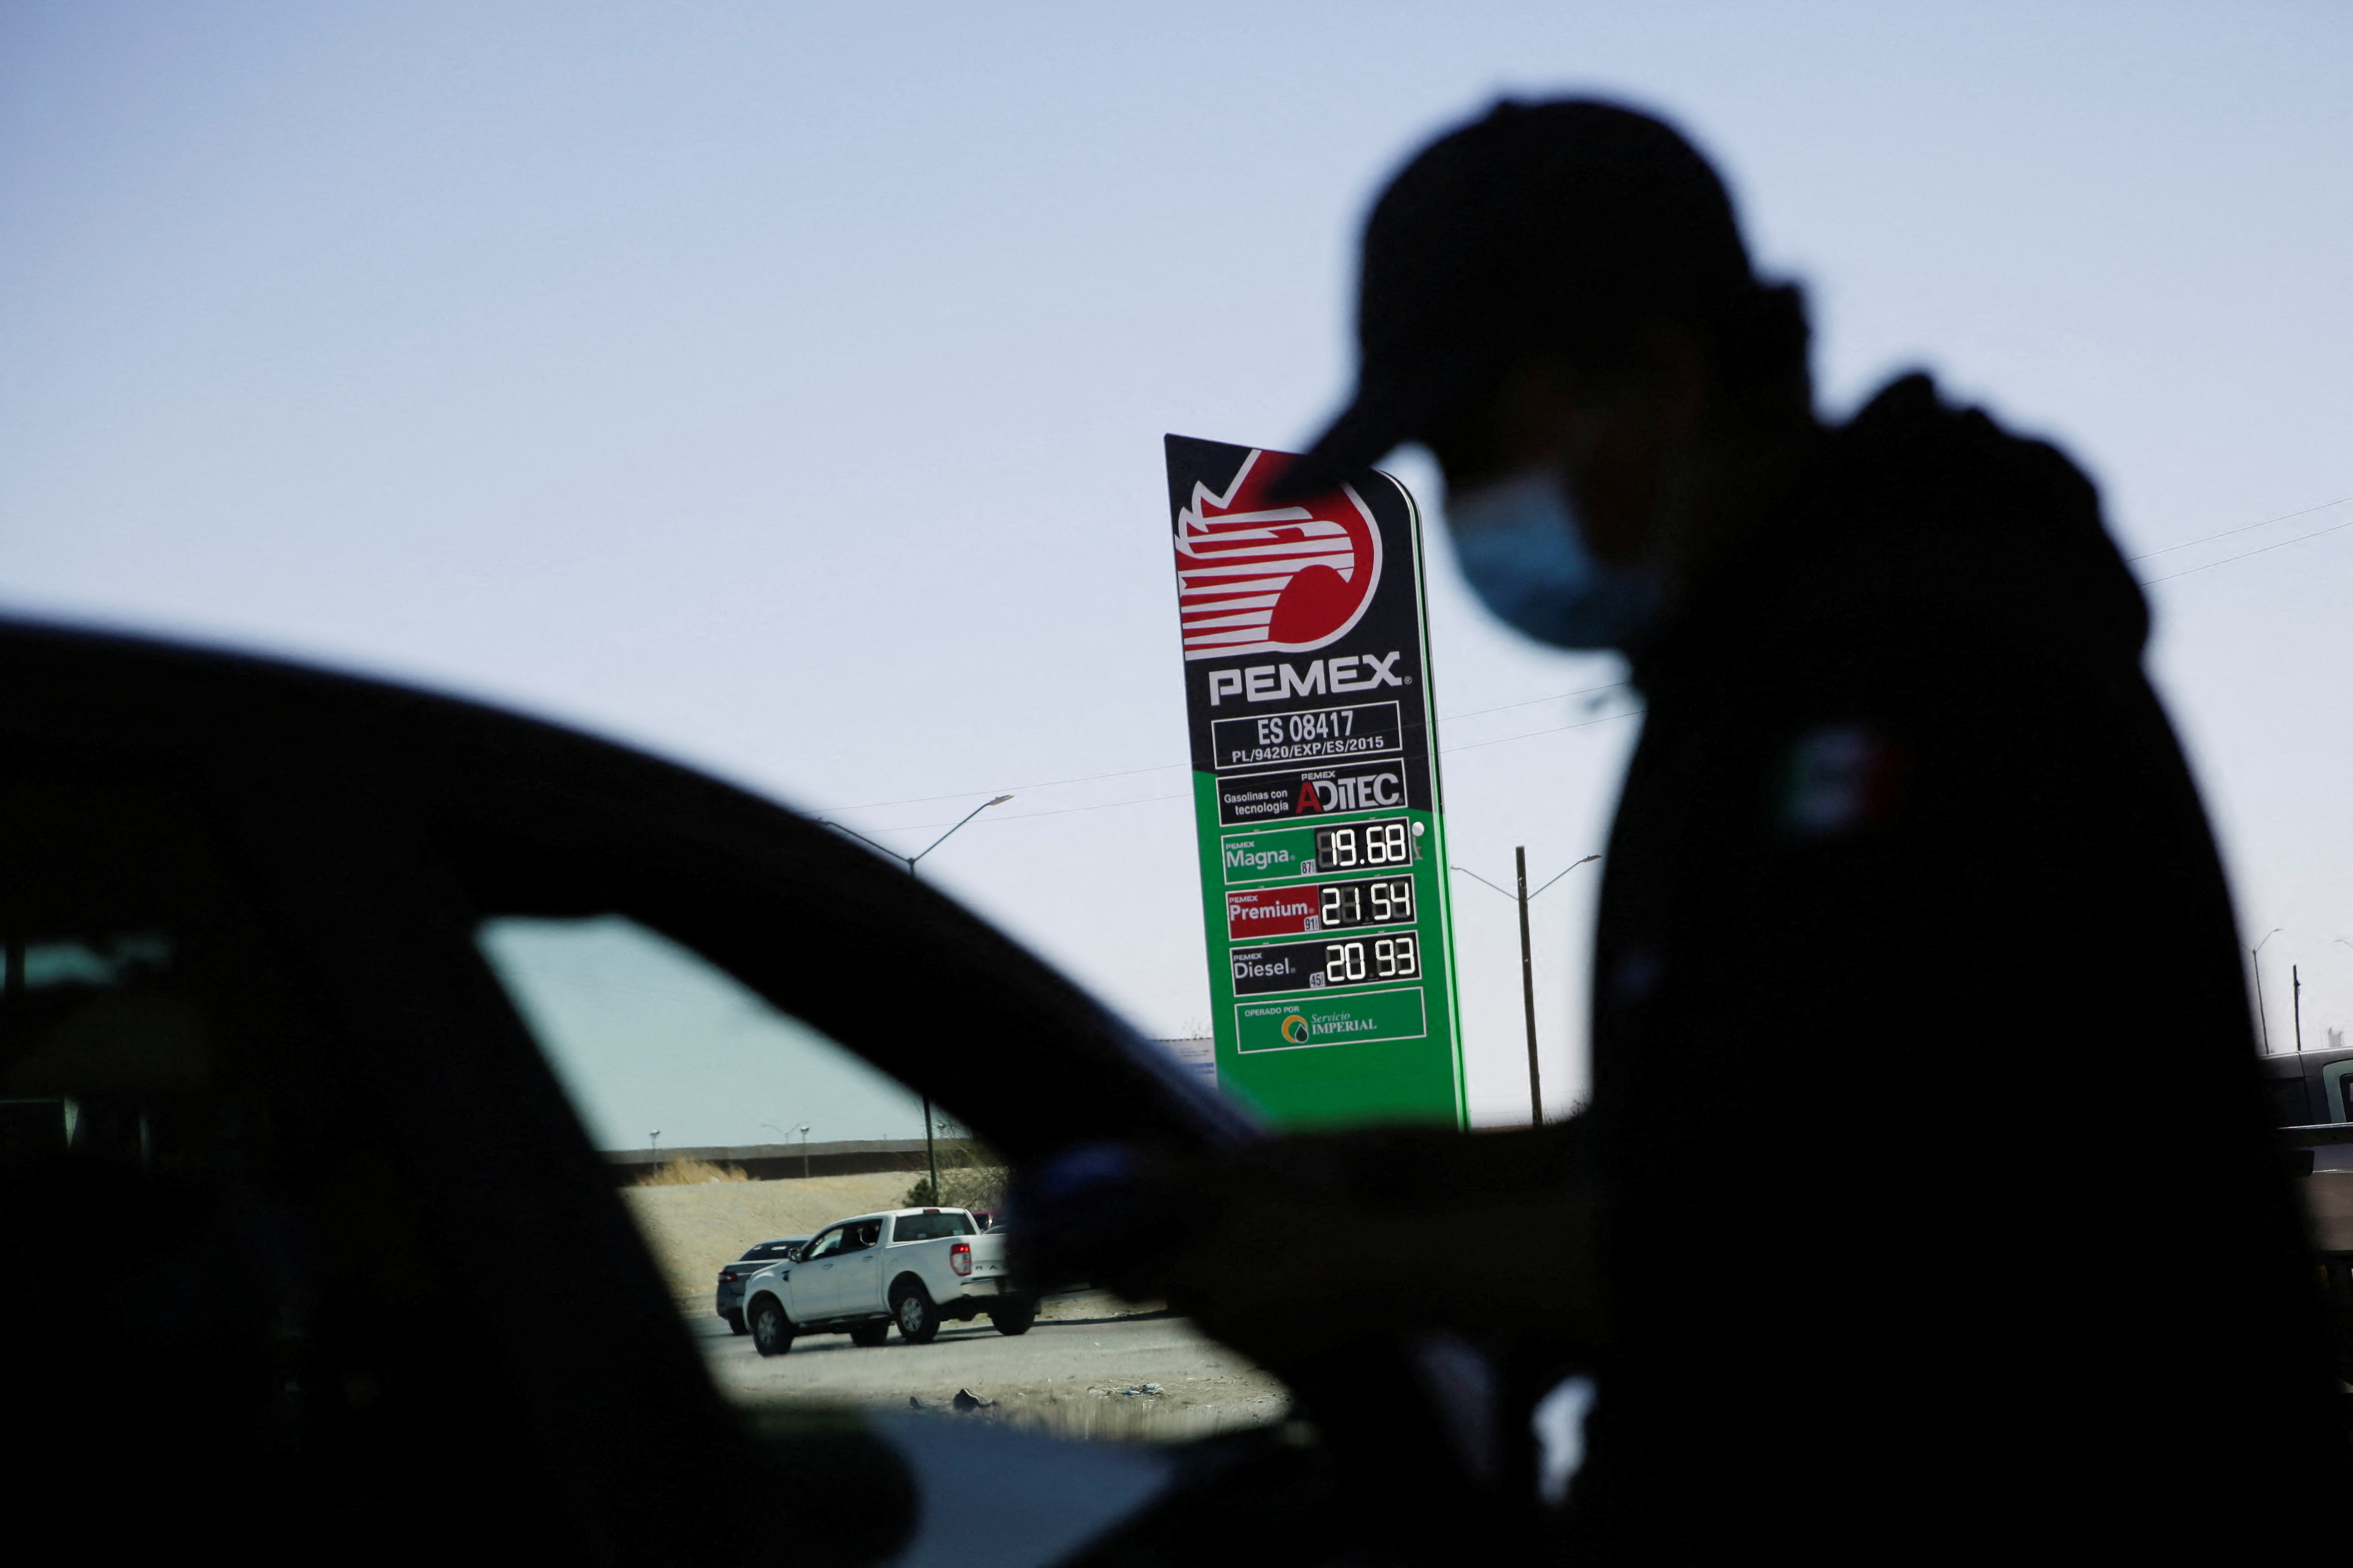 A sign of Mexican state oil company Petroleos Mexicanos (PEMEX) shows their prices of the gasoline at a service station after Mexico suspended a week of gasoline subsidy along the U.S. border, in Ciudad Juarez, Mexico April 2, 2022. REUTERS/Jose Luis Gonzalez